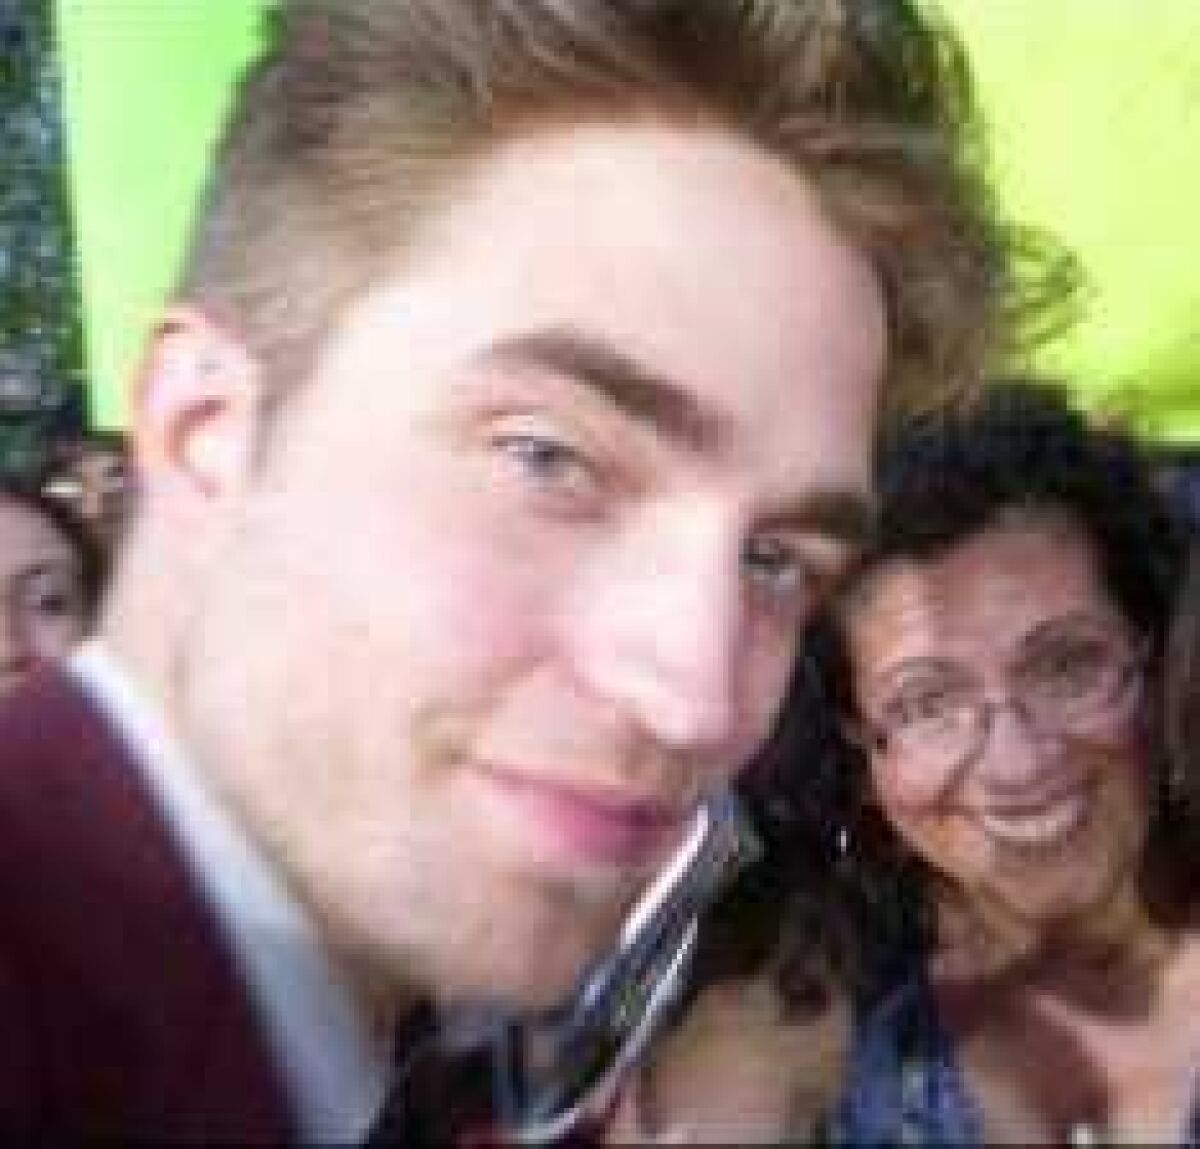 Gisela Gagliardi poses with "Twilight" star Robert Pattinson in a 2010 photo posted on her Facebook page.